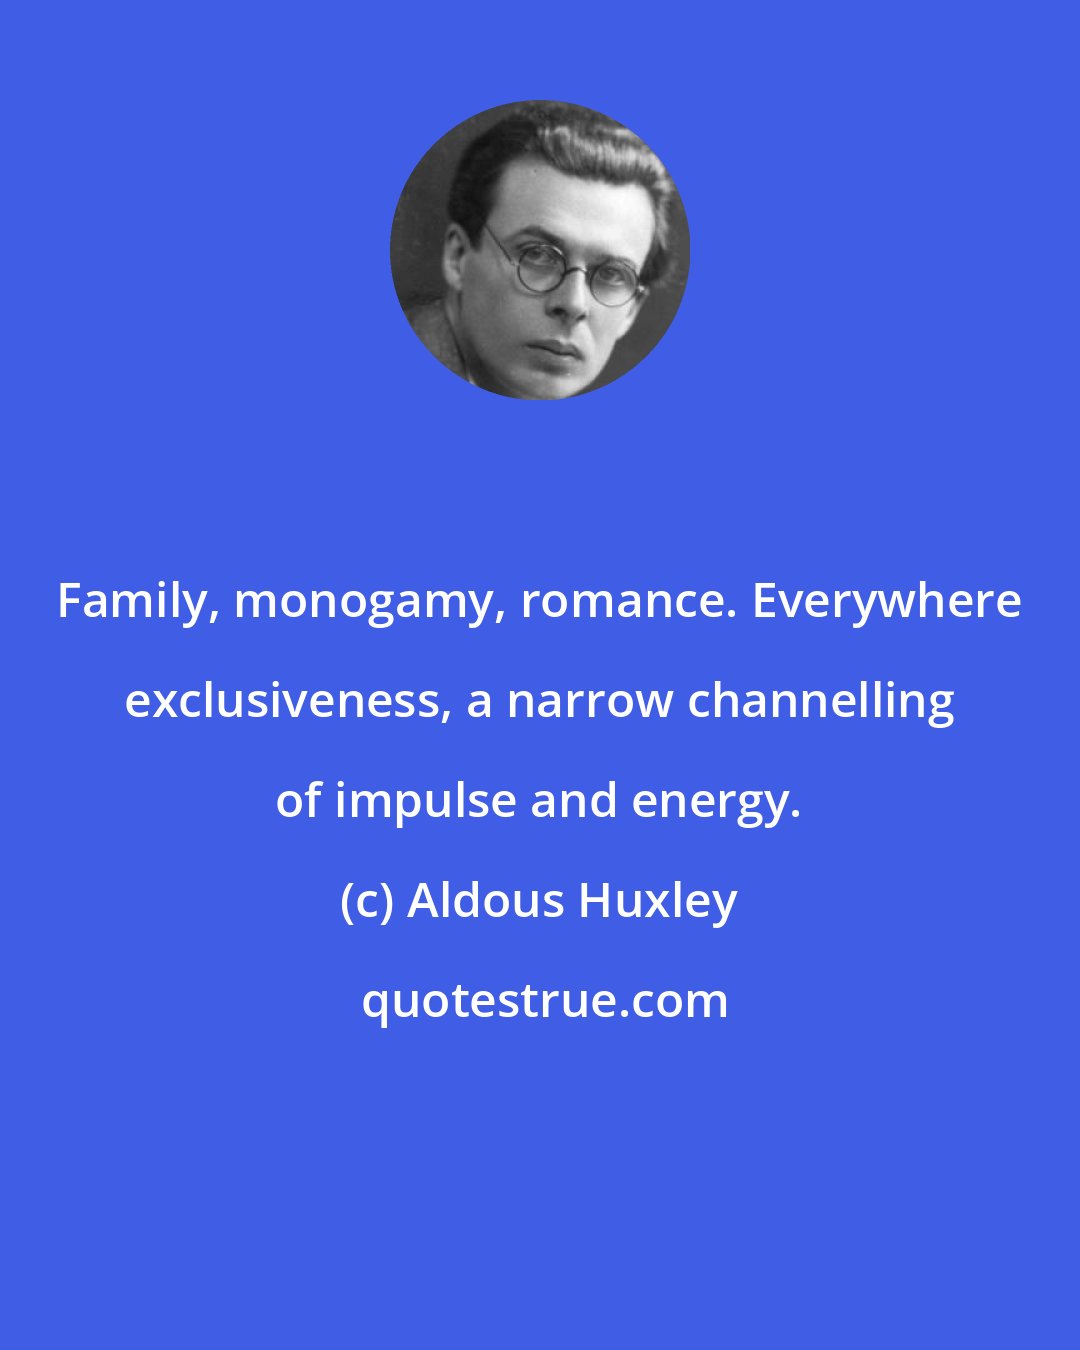 Aldous Huxley: Family, monogamy, romance. Everywhere exclusiveness, a narrow channelling of impulse and energy.